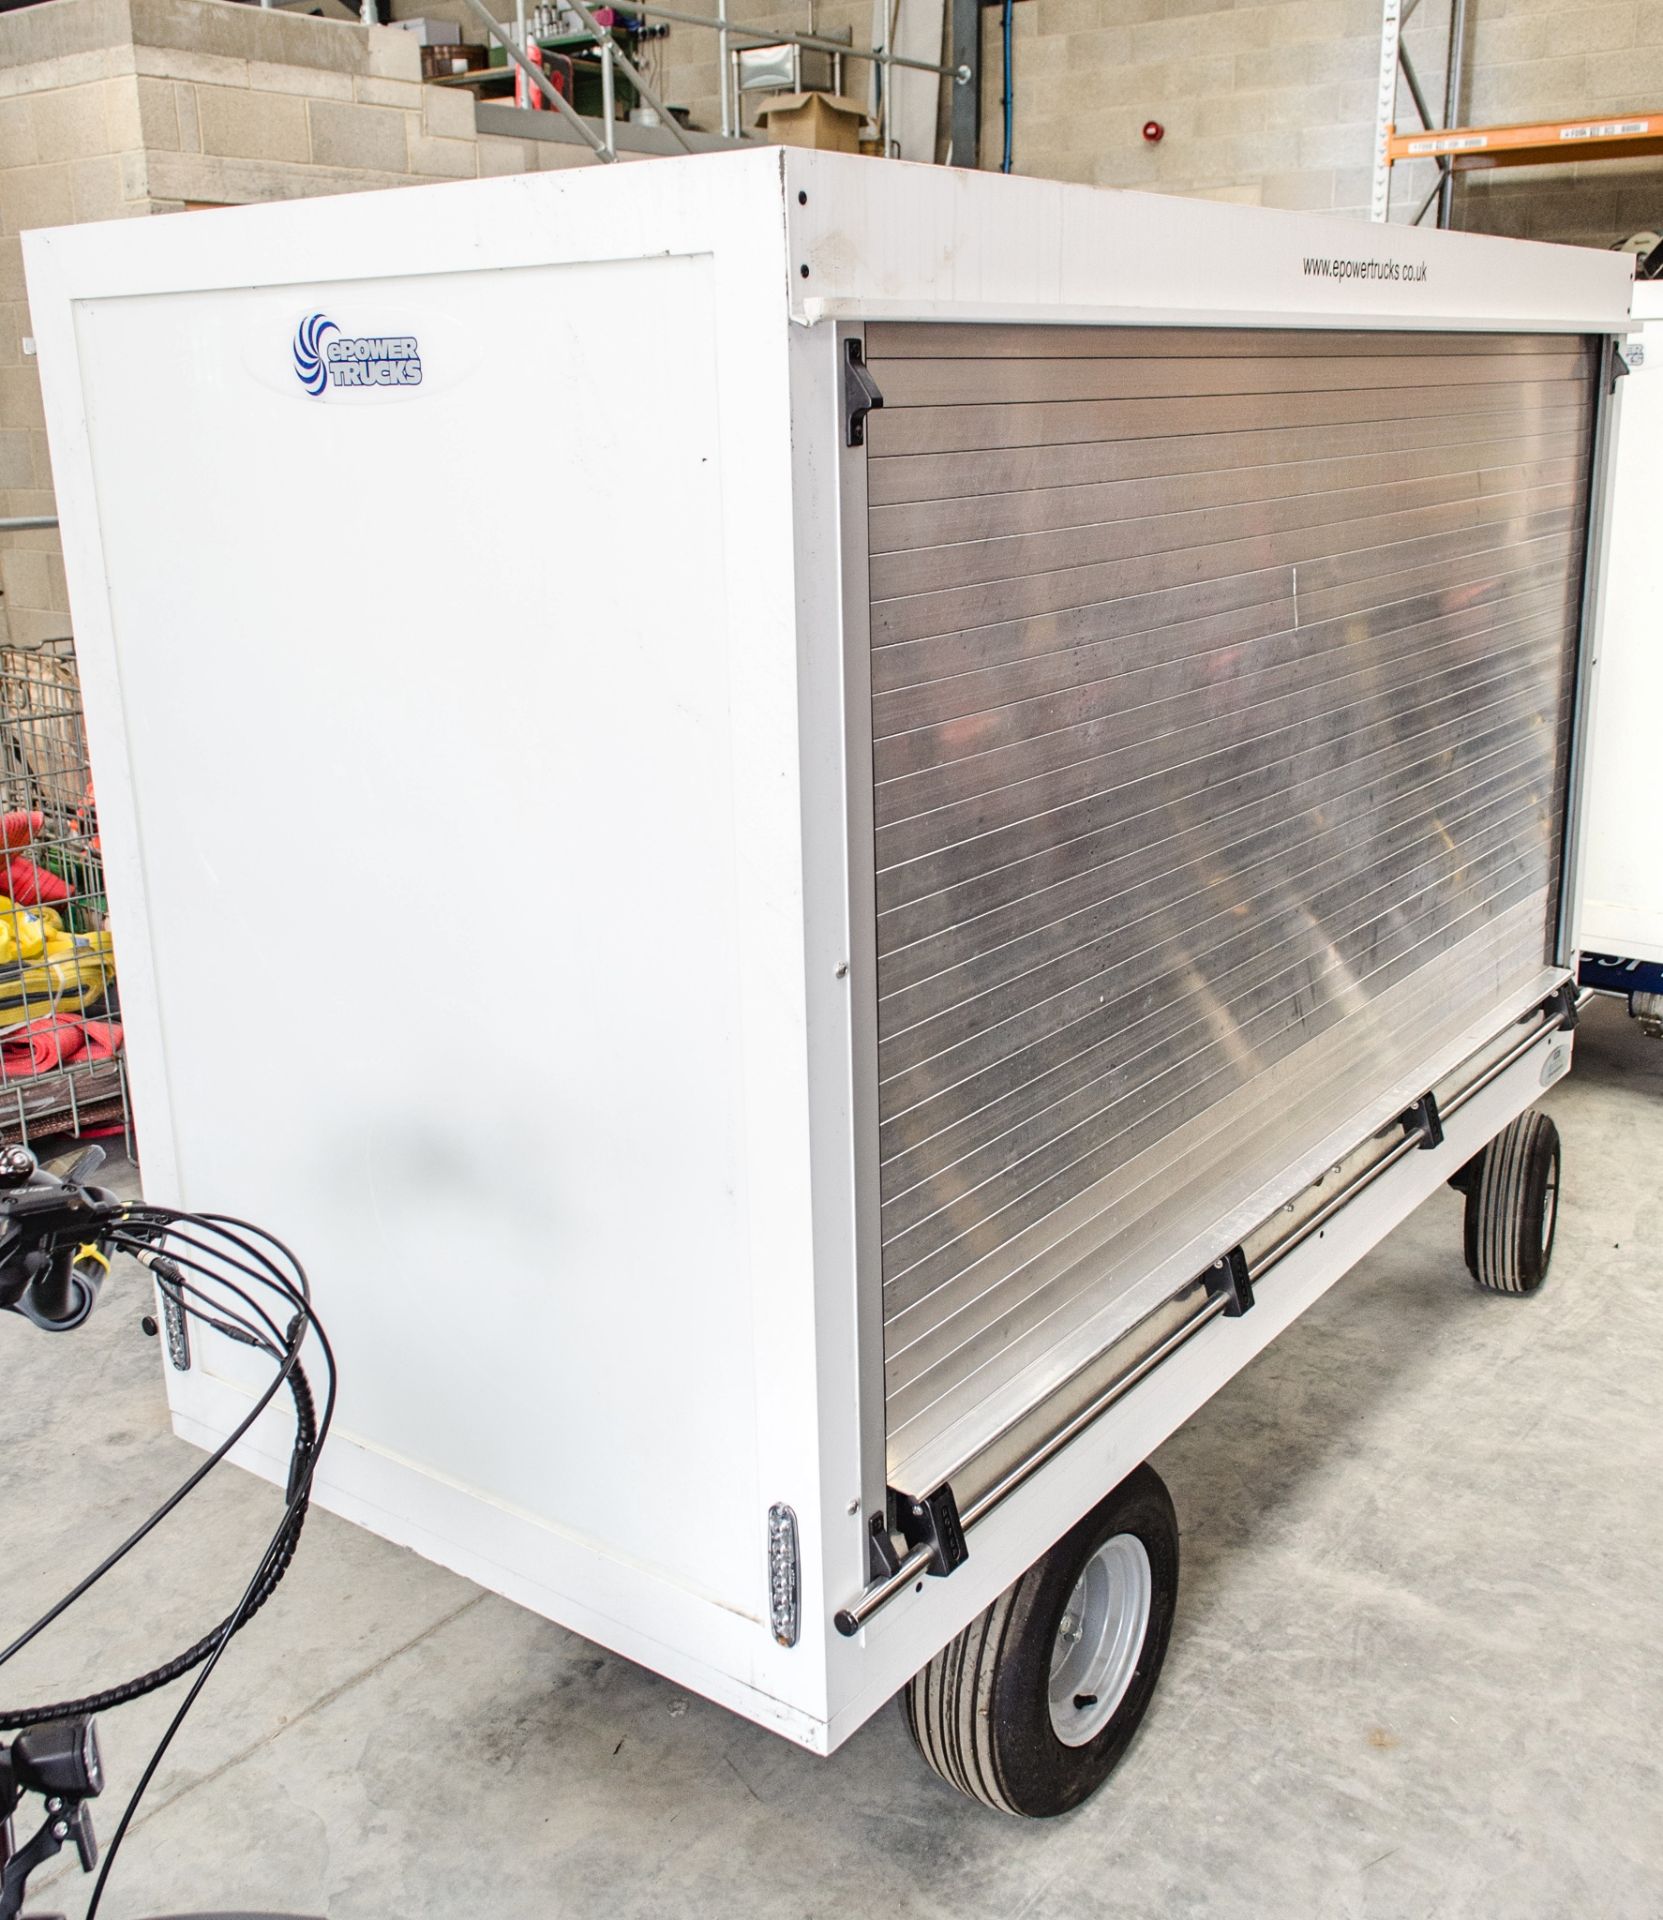 Zallys battery electric 4 wheel roller shutter cart Year: 2019 c/w battery charger - Image 2 of 7